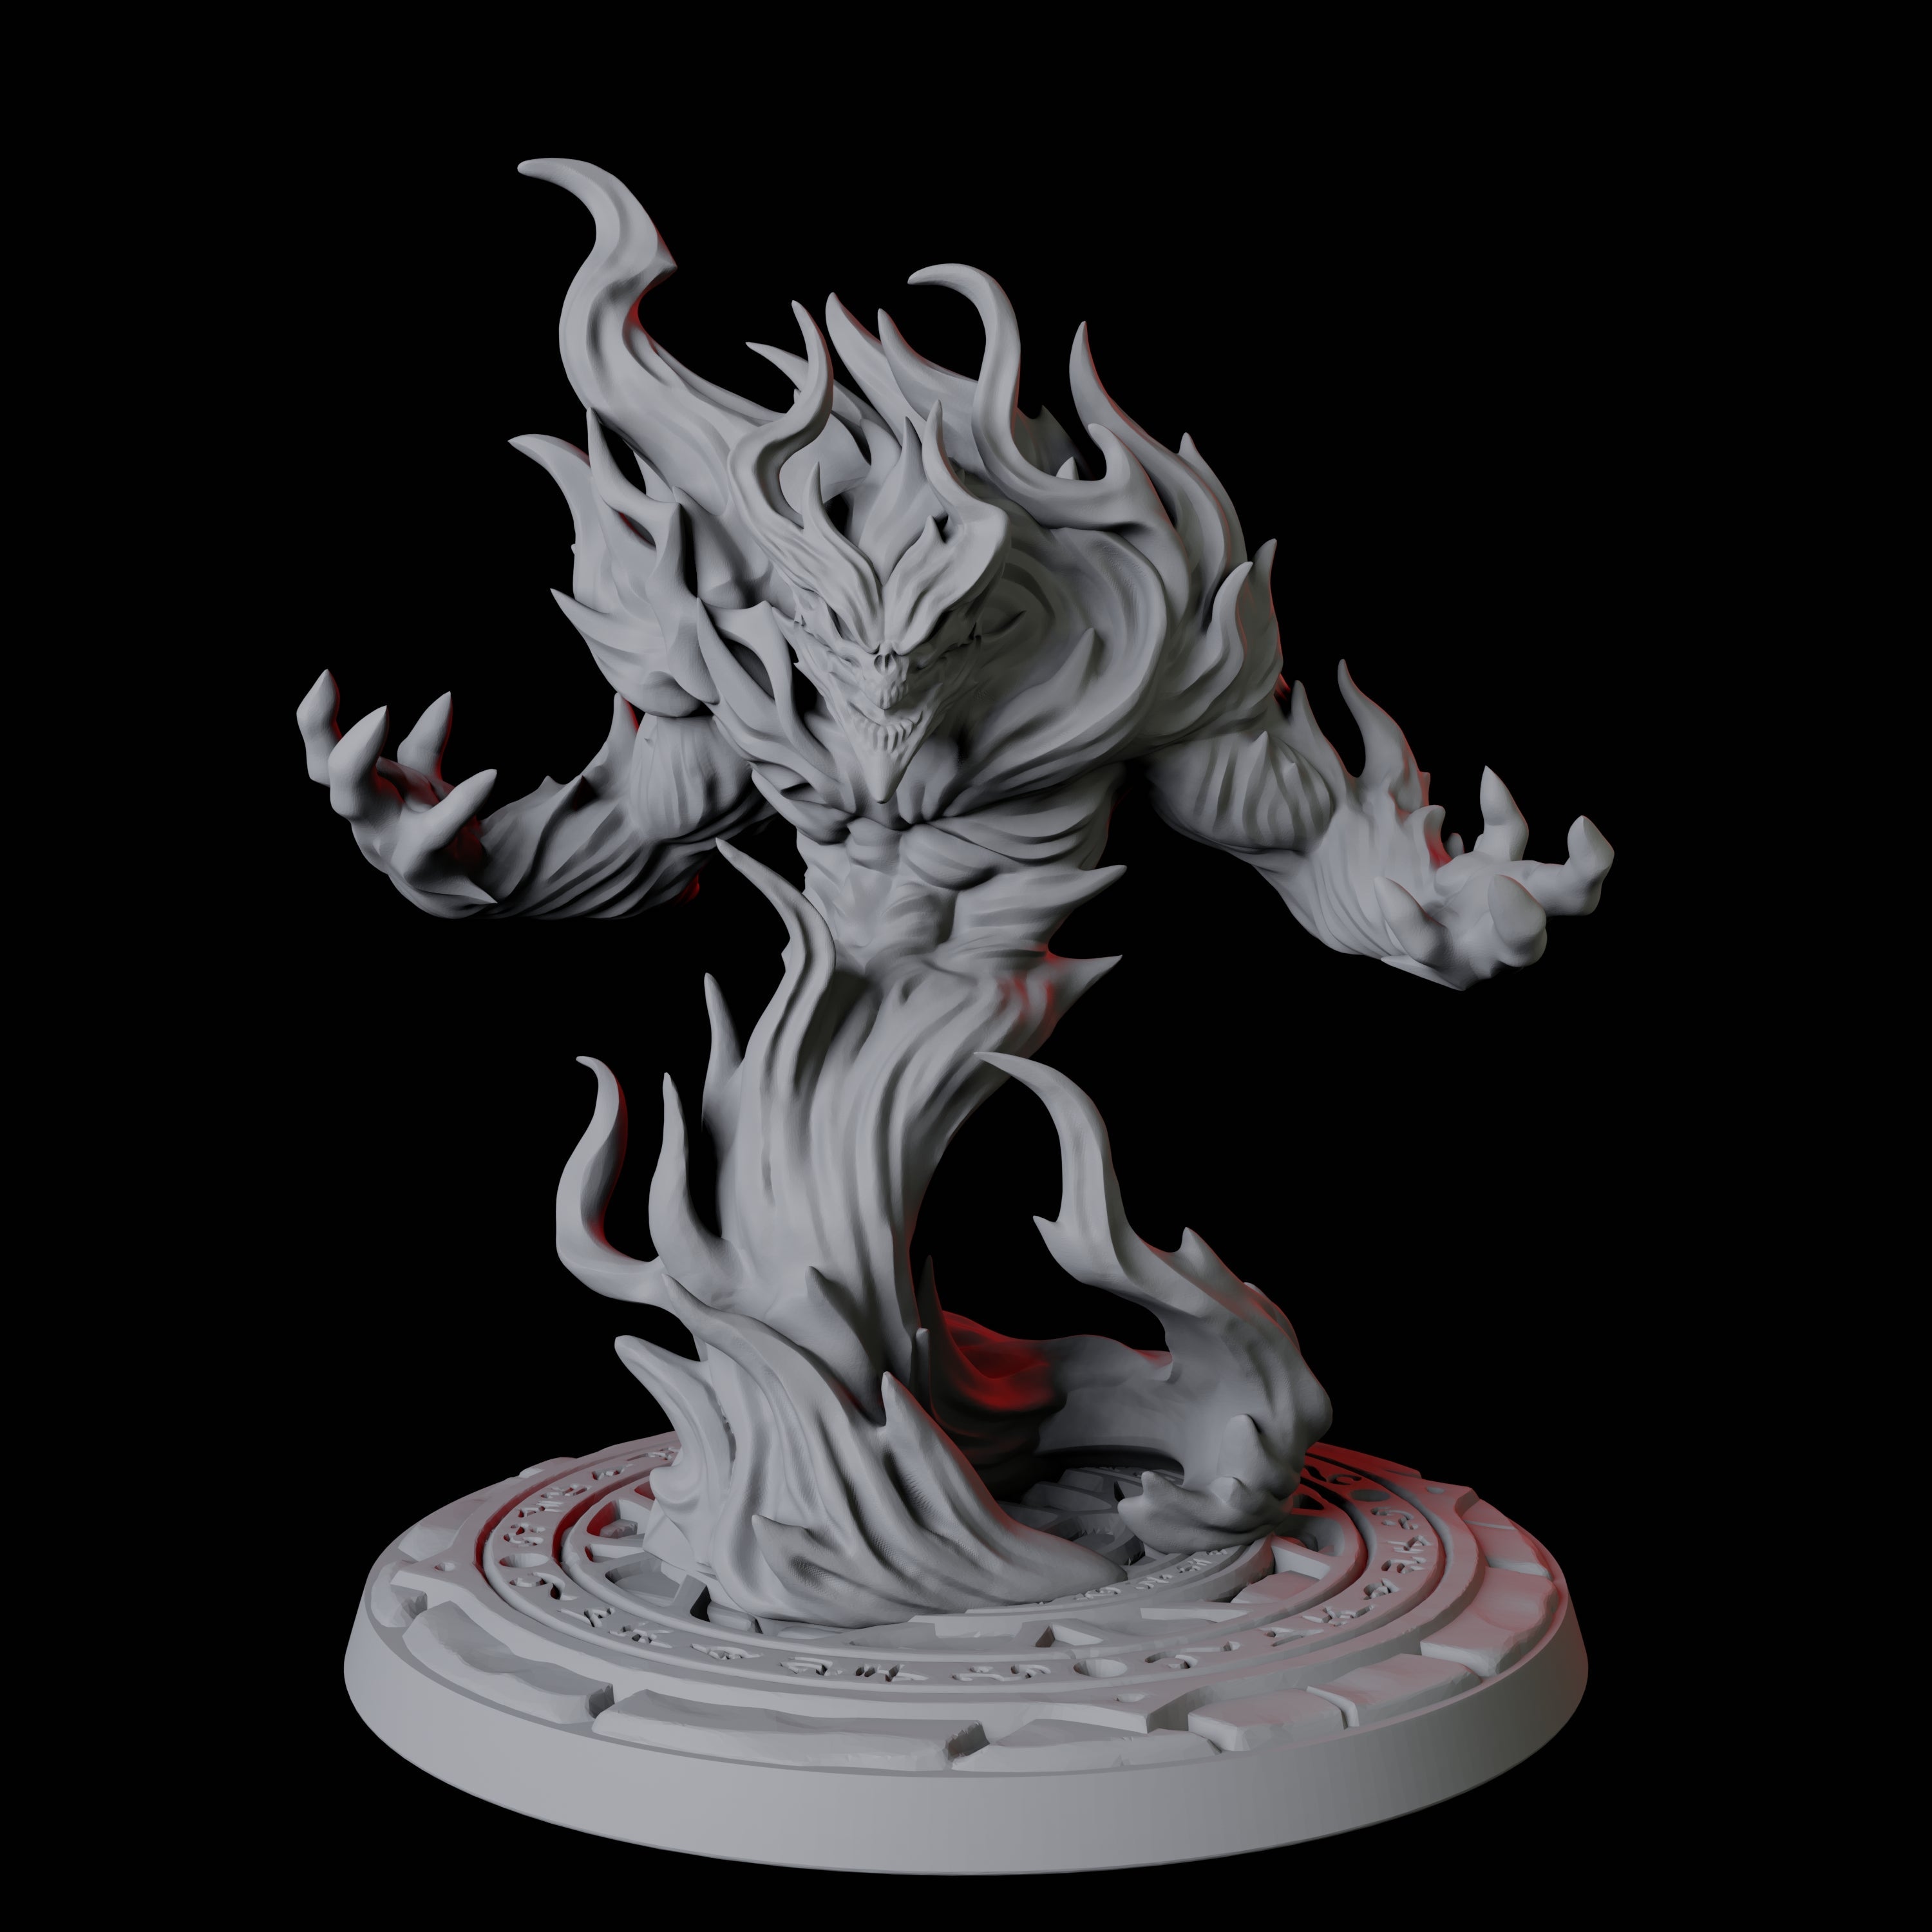 Four Elementals Miniature for Dungeons and Dragons, Pathfinder or other TTRPGs